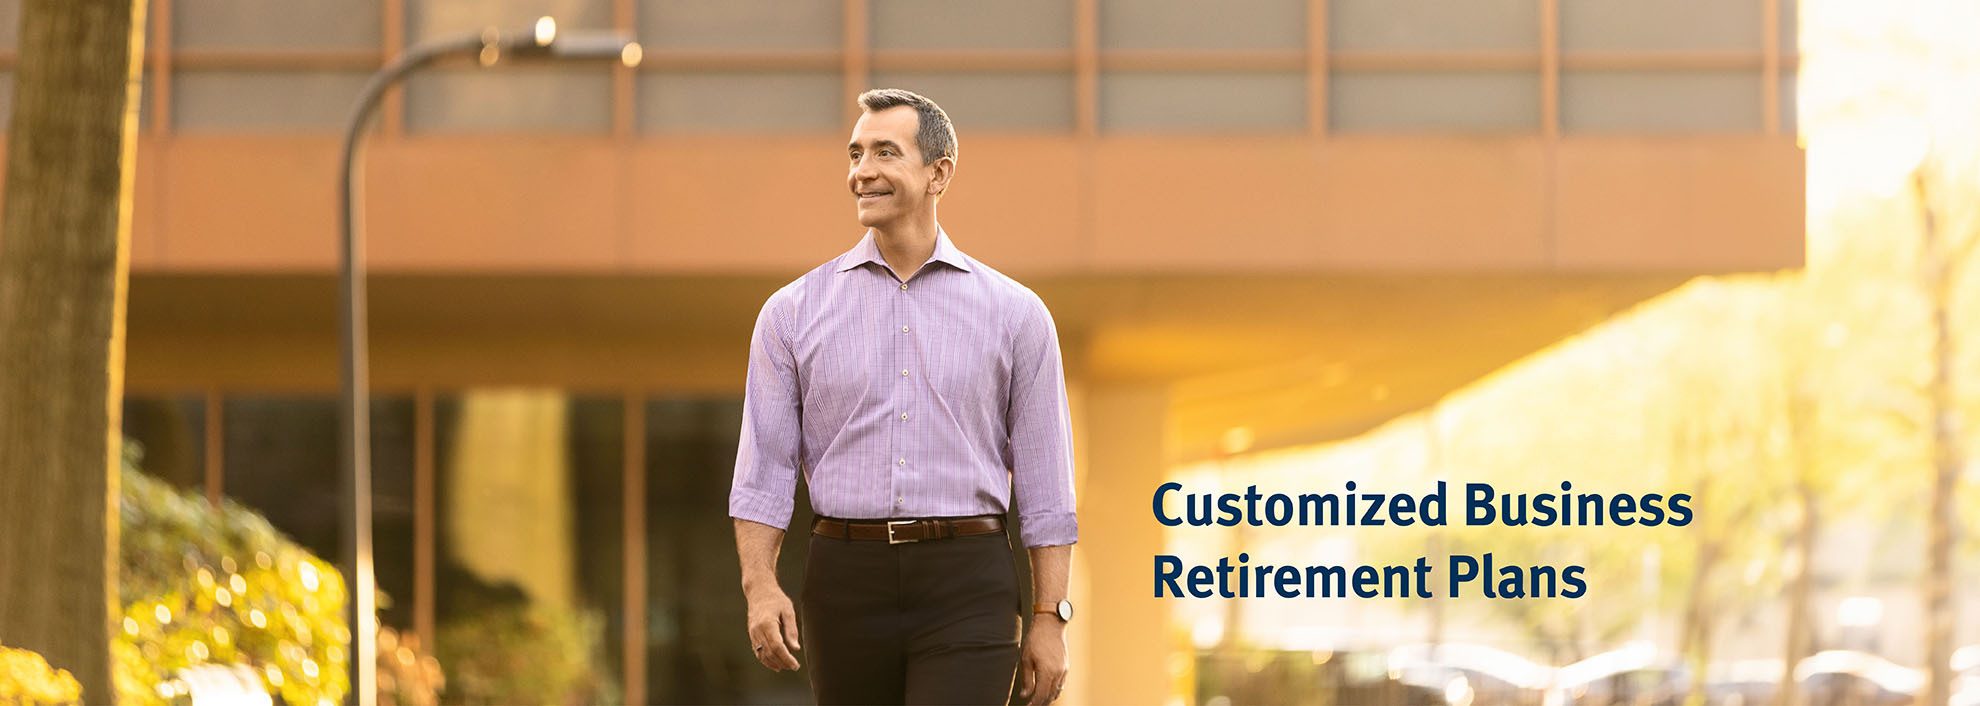 Customized Business Retirement Plans on image of Walter Mancing